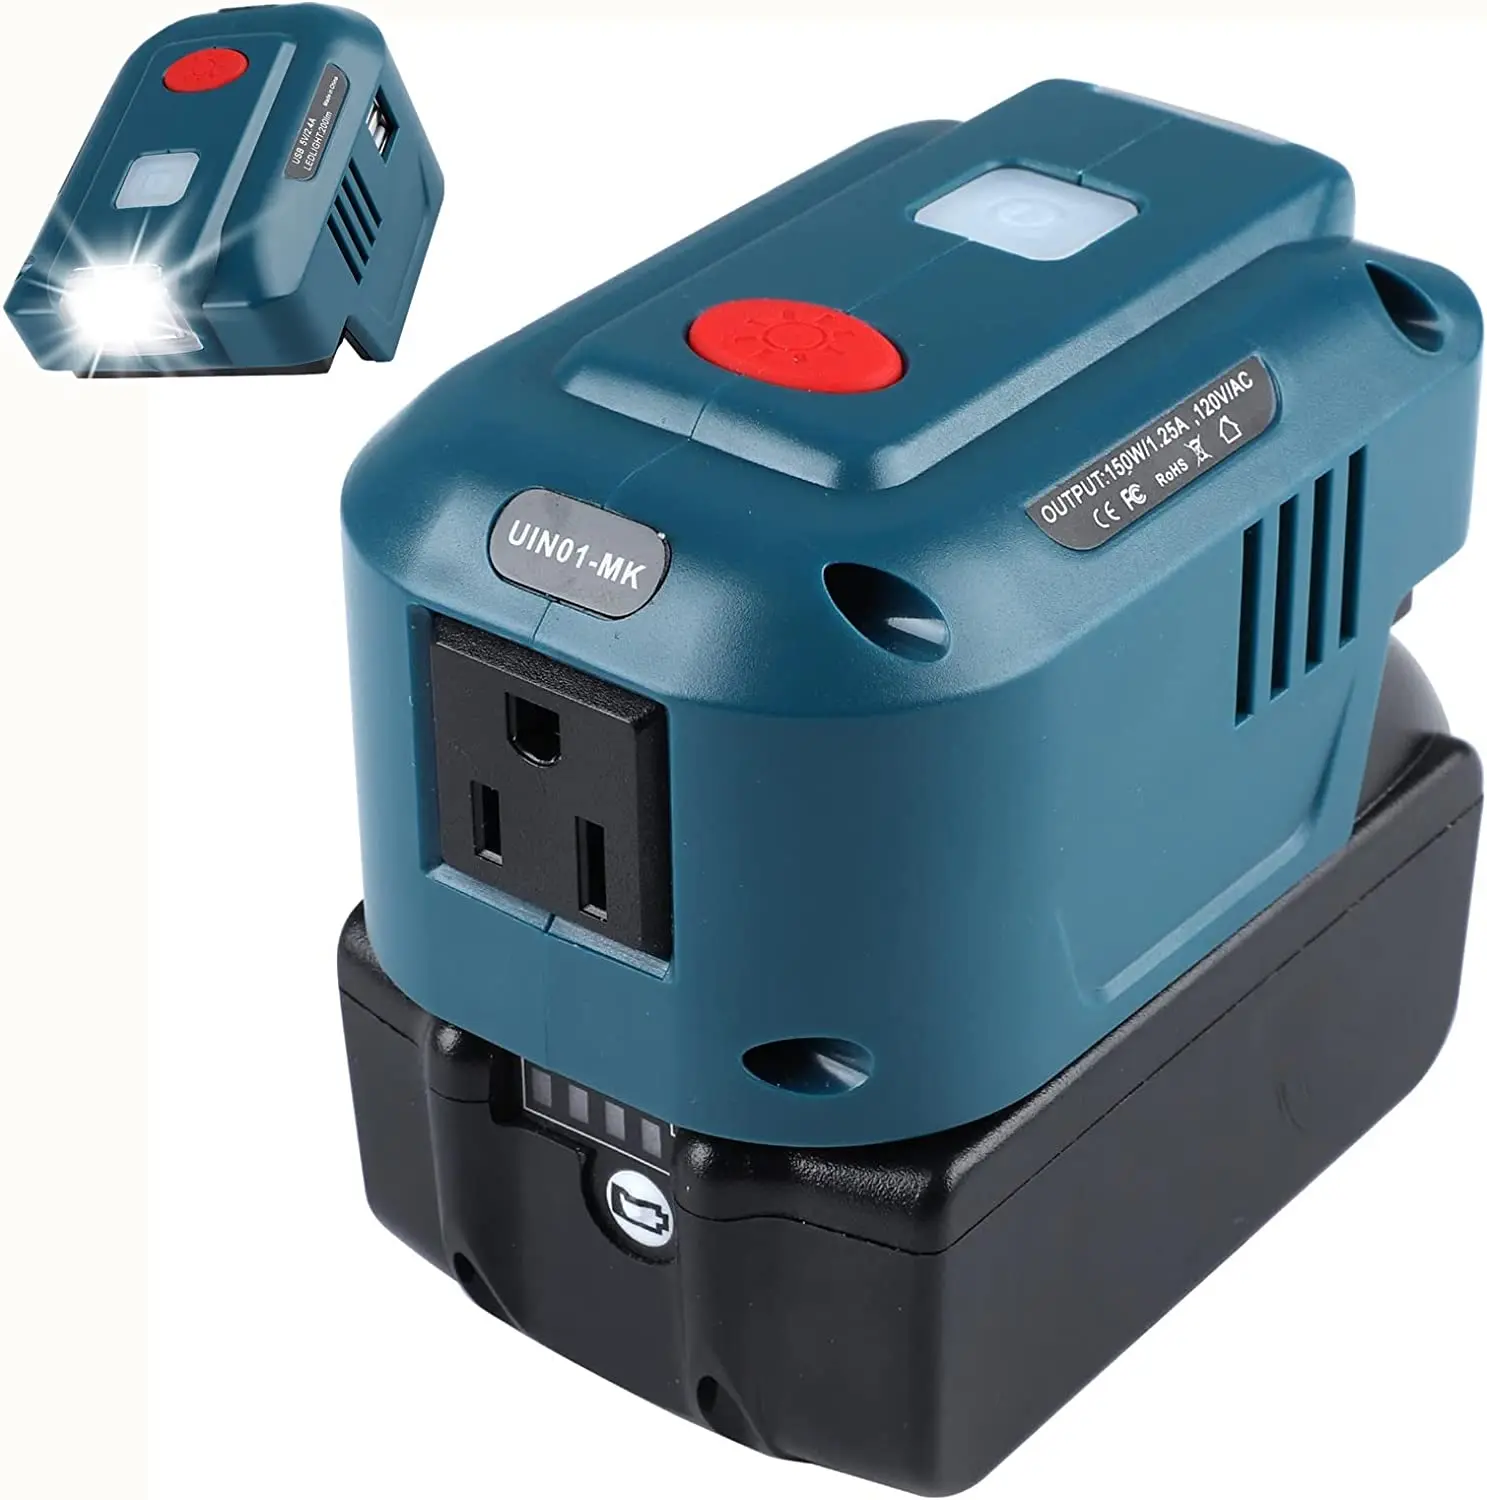 Portable Power Inverter for Makita 18V Battery,150W Power Station AC Outlet with Dual USB, DC 18V to AC 120V Inverter Generator hifi 150w amp dual channel power amplifier board s30 on semiconductor 0281 0302 transistor is better than tda7293 lm3886